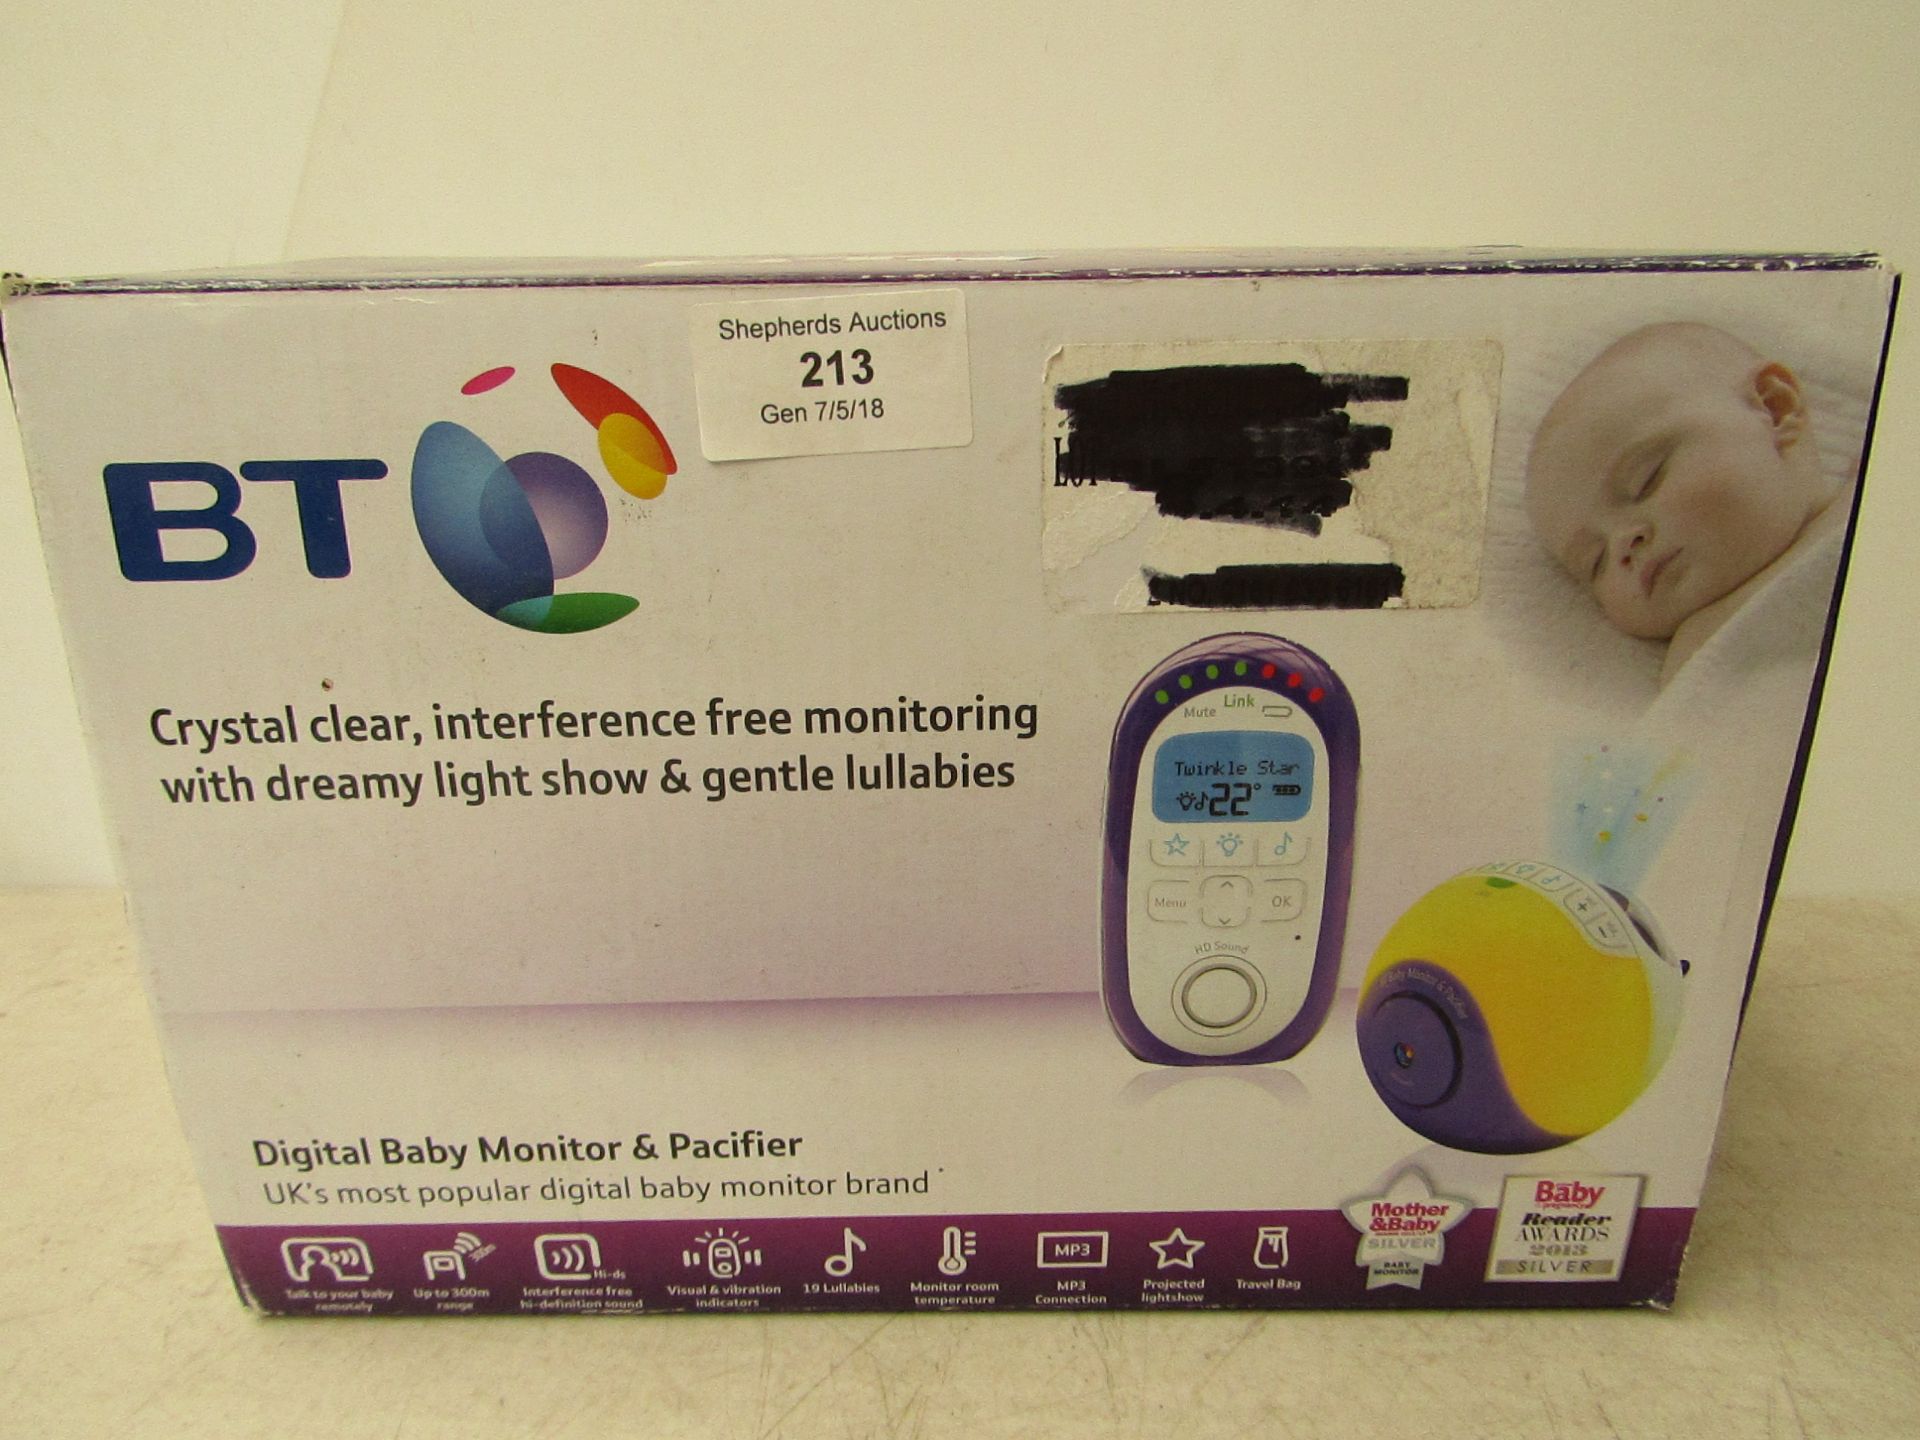 BT digital baby monitor & pacifier, unchecked and boxed.